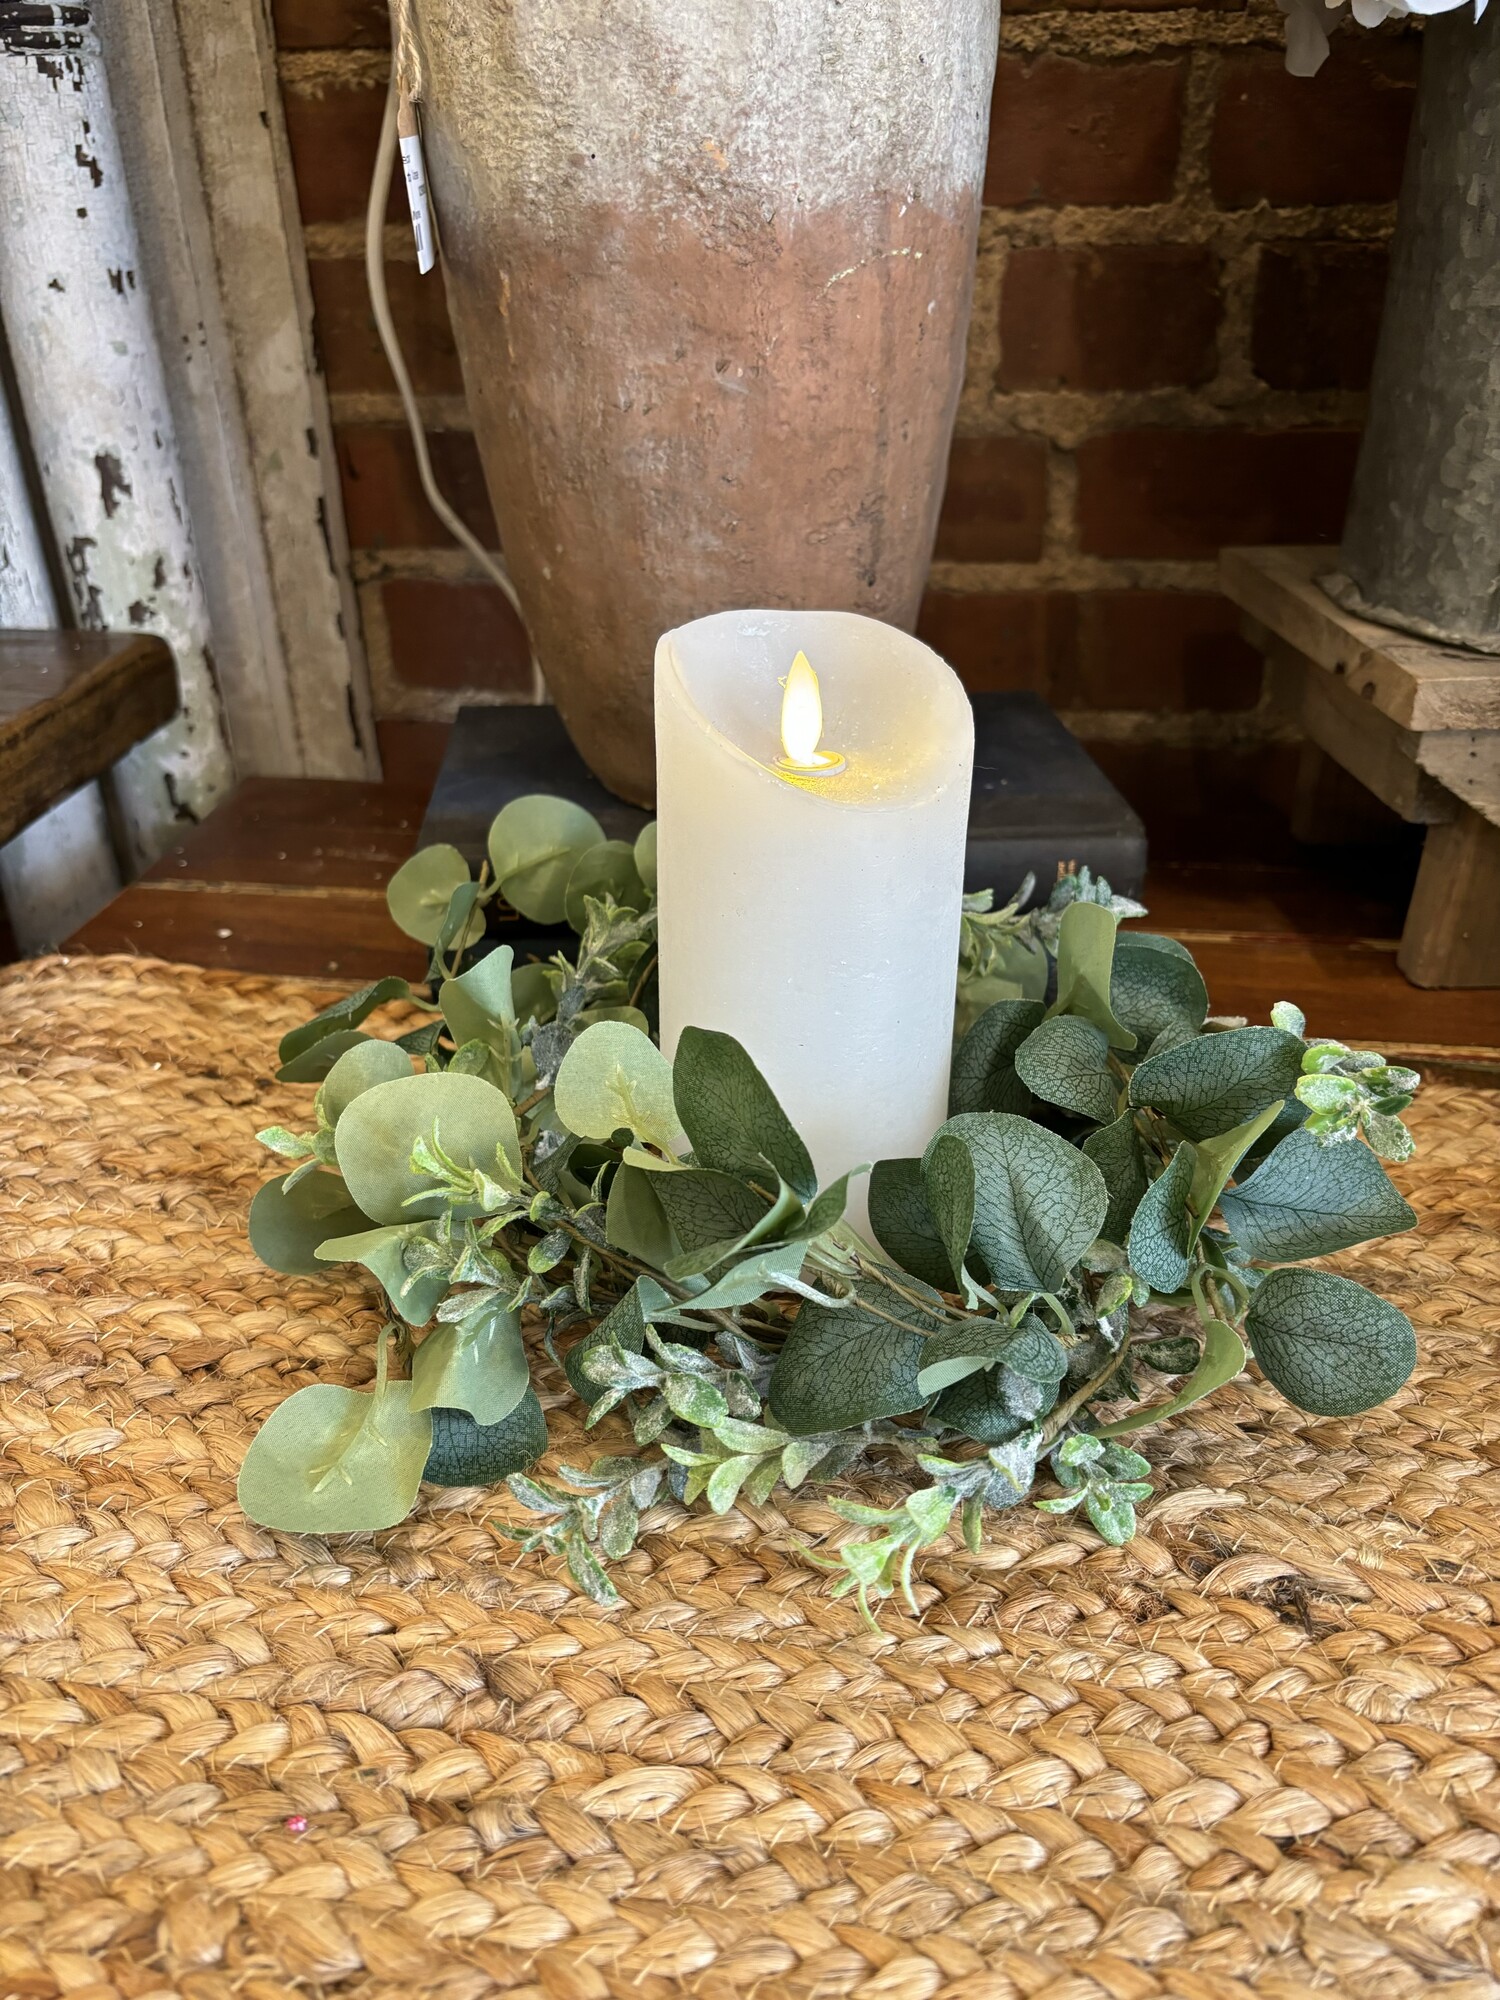 The Eucalyptus Candle Ring is a beautiful all season floral, with its fabric leaves and sprigs of greenry make this a perfecat addition to any decor
Inner ring measrues 5 inches and is approx 10 to 12 inches in width